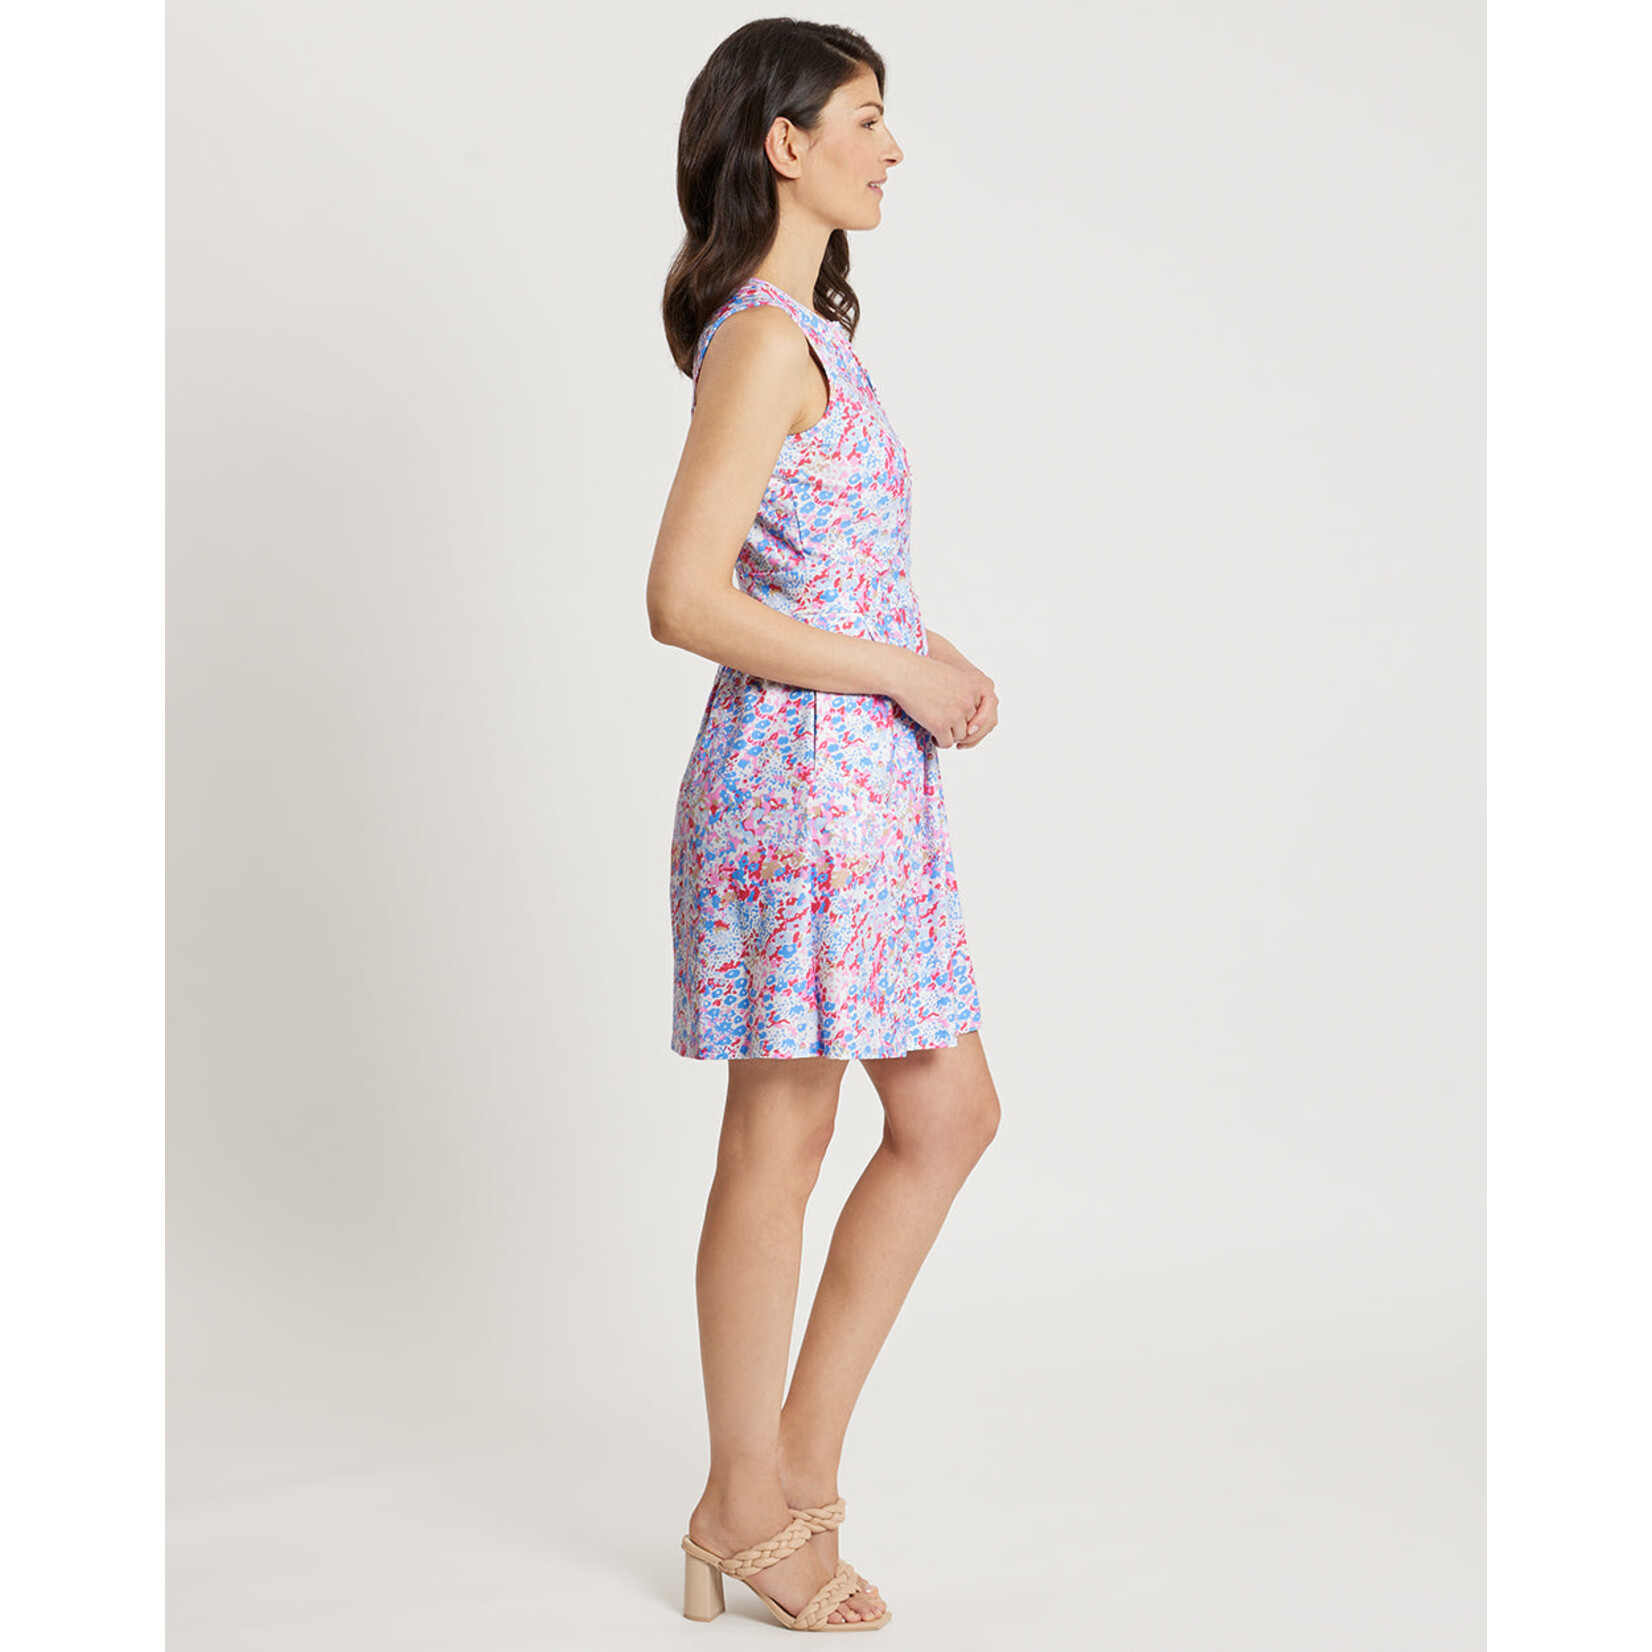 Jude Connally Julie Dress - Watercolor Floral Periwinkle